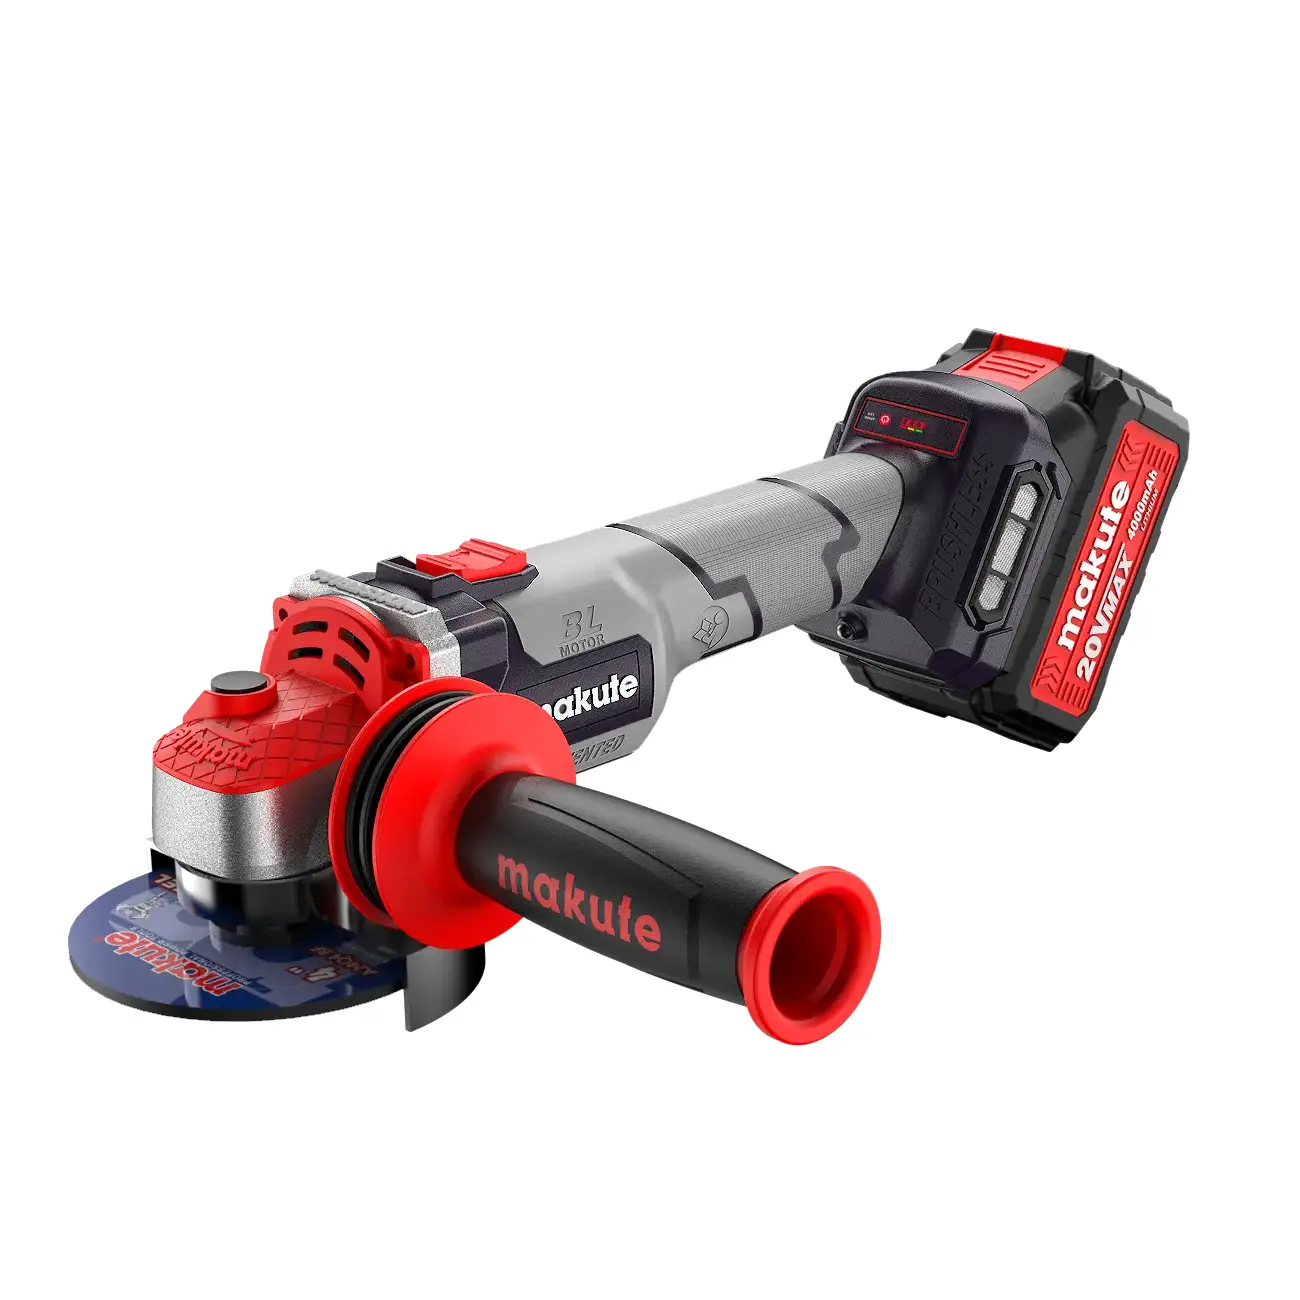 Lithium Angle Grinder